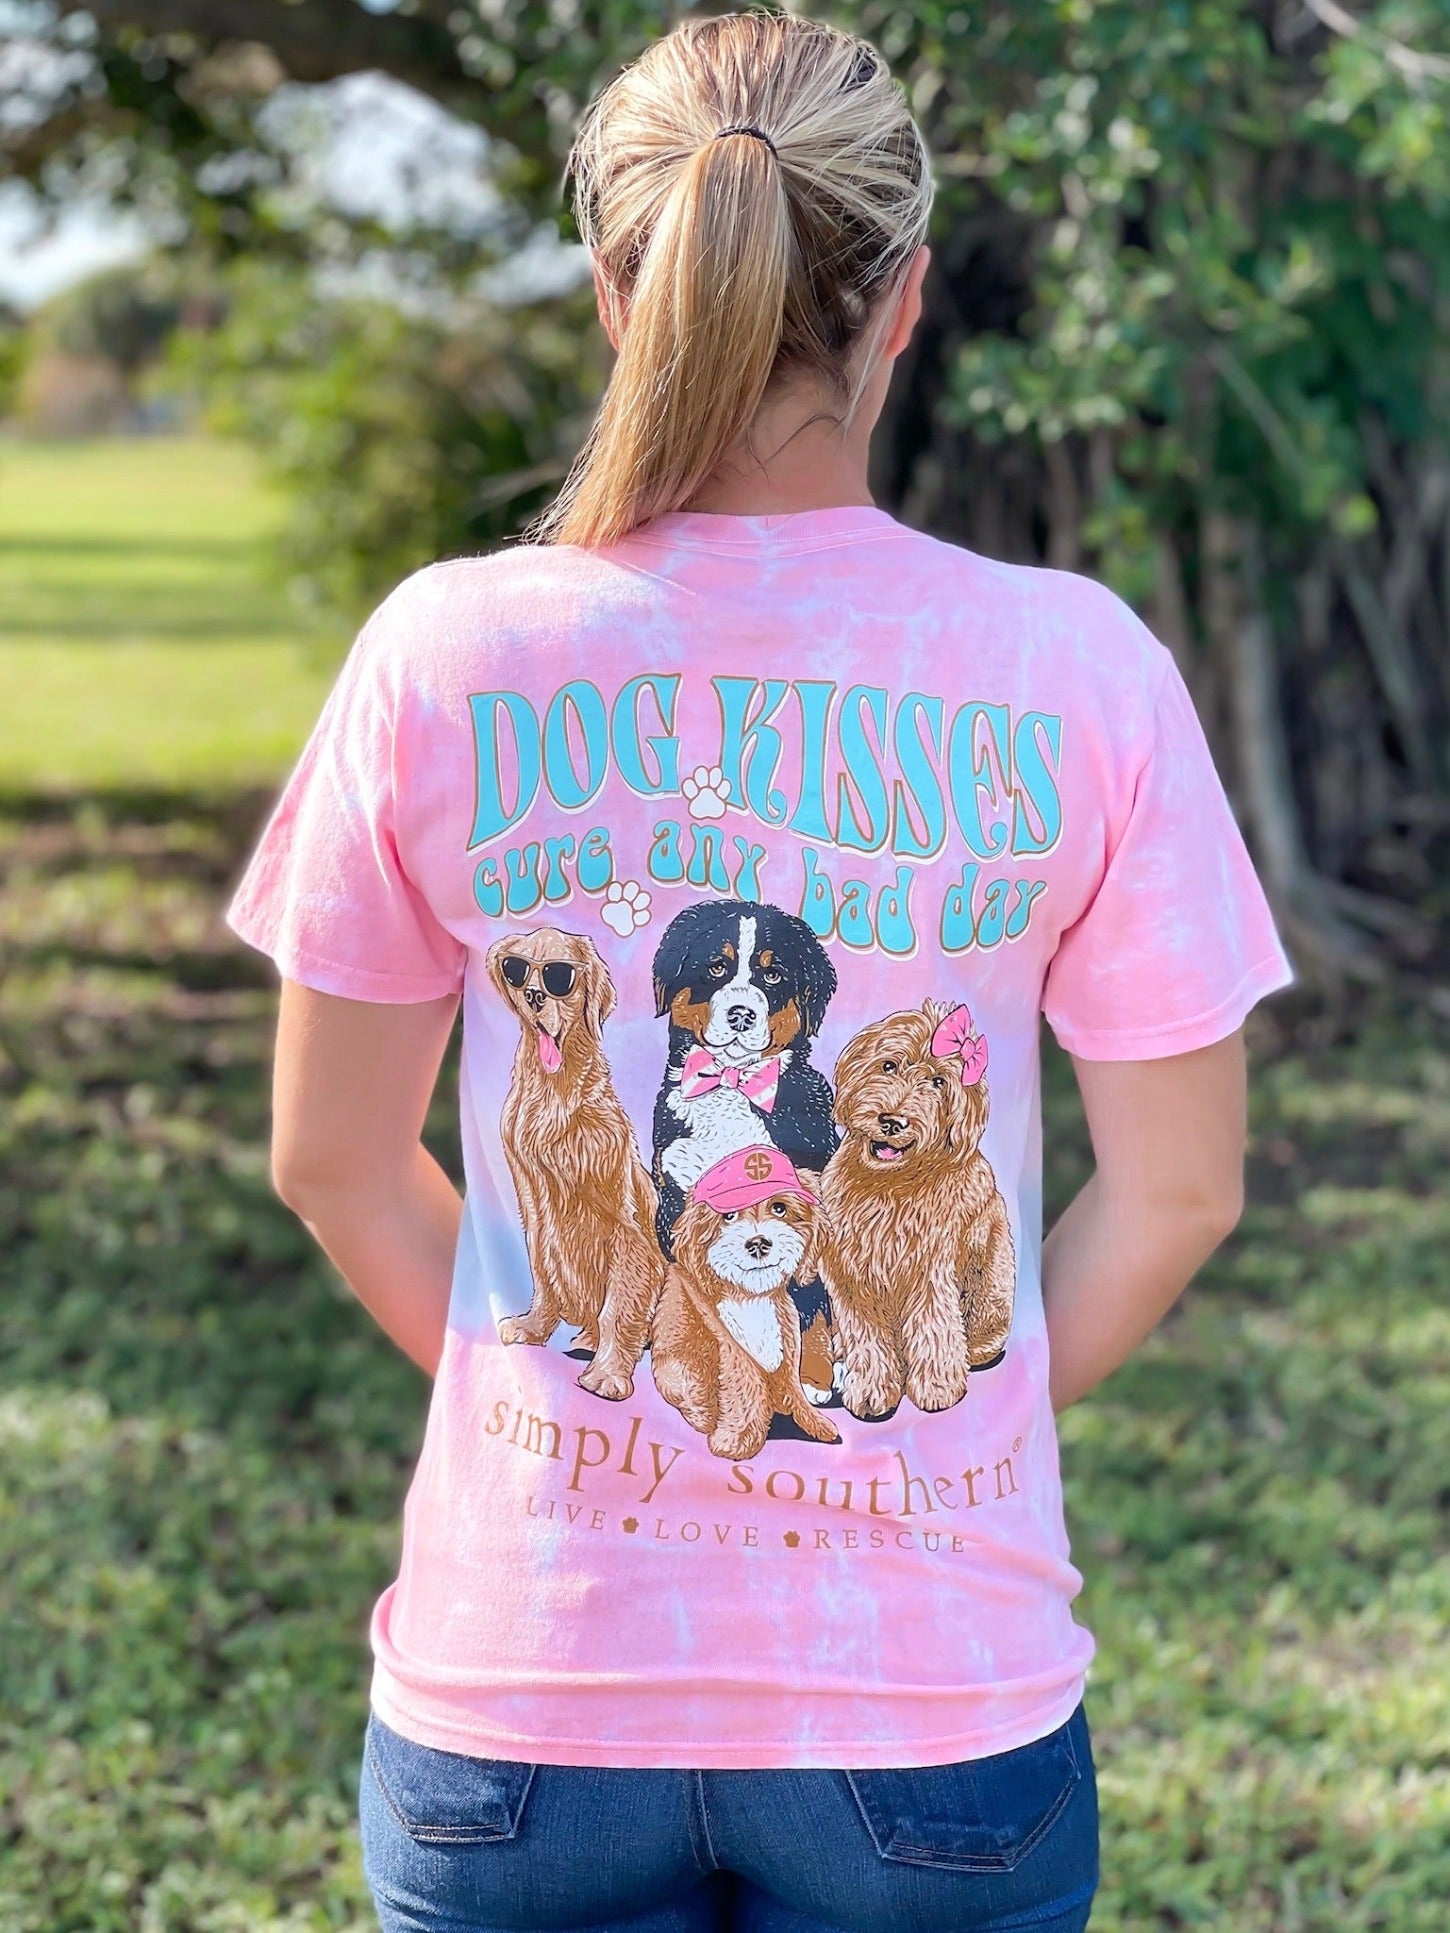 'Dog Kisses Cure Any Bad Day' Tie Dye Short Sleeve Tee by Simply Southern